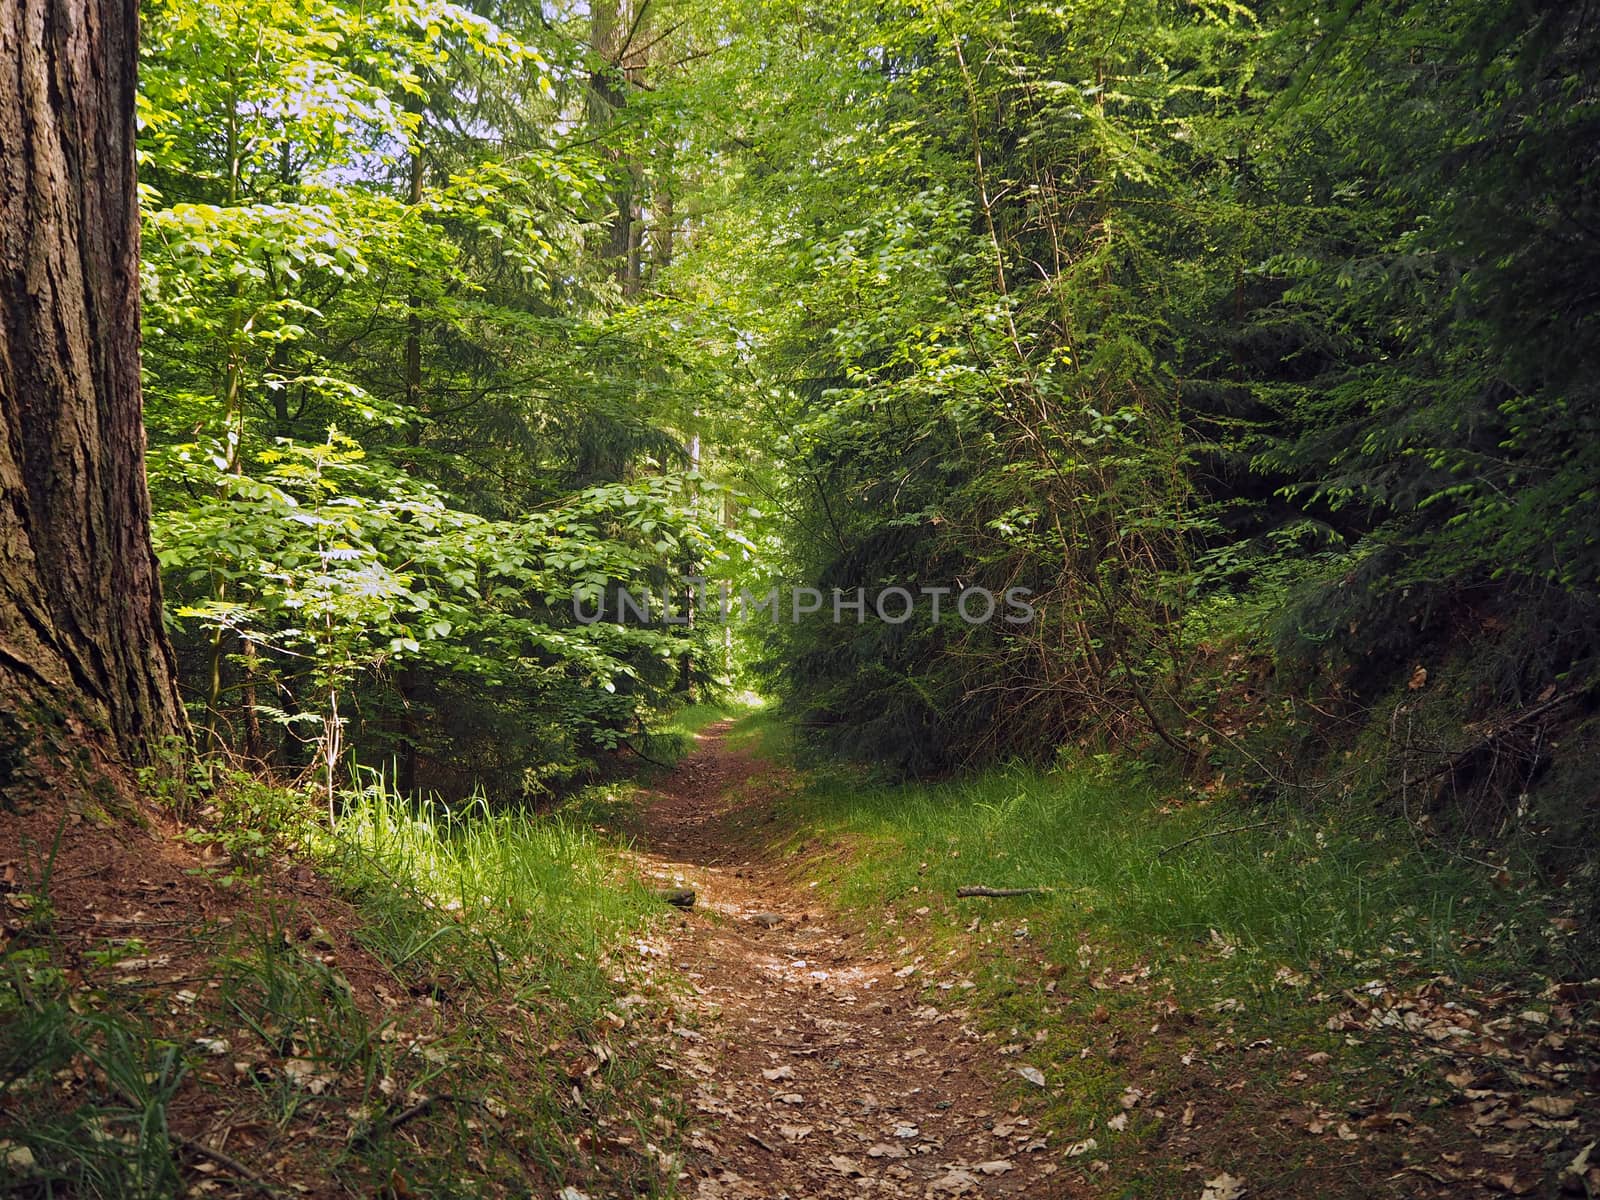 footpath in the green spring assorted forest